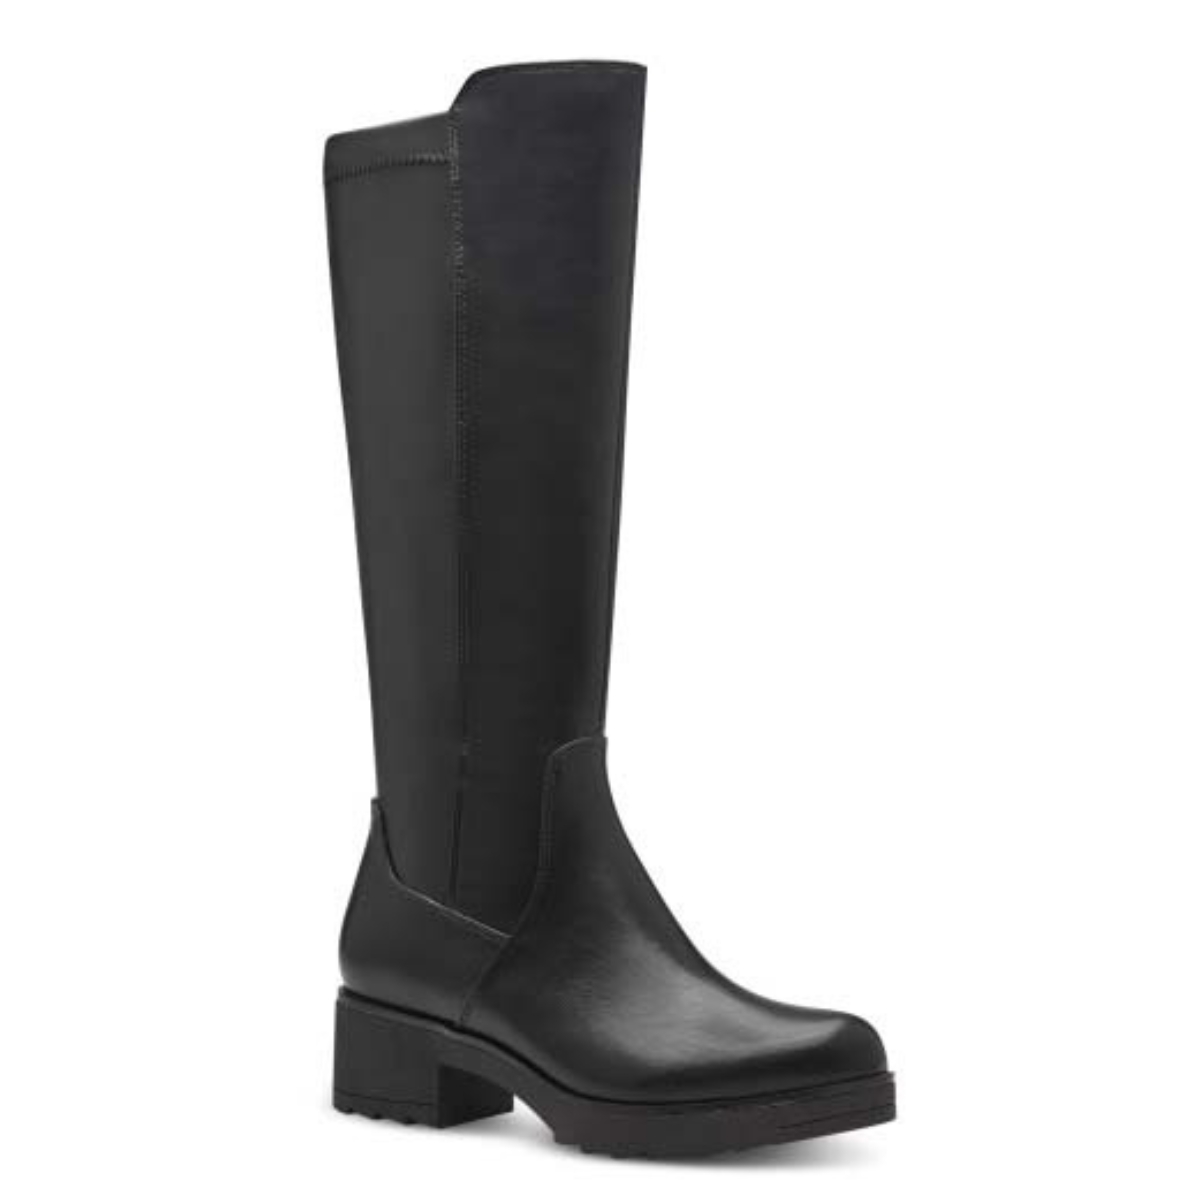 Marco Tozzi Dono Long Black Womens Knee-High Boots 25606-41-001 In Size 40 In Plain Black